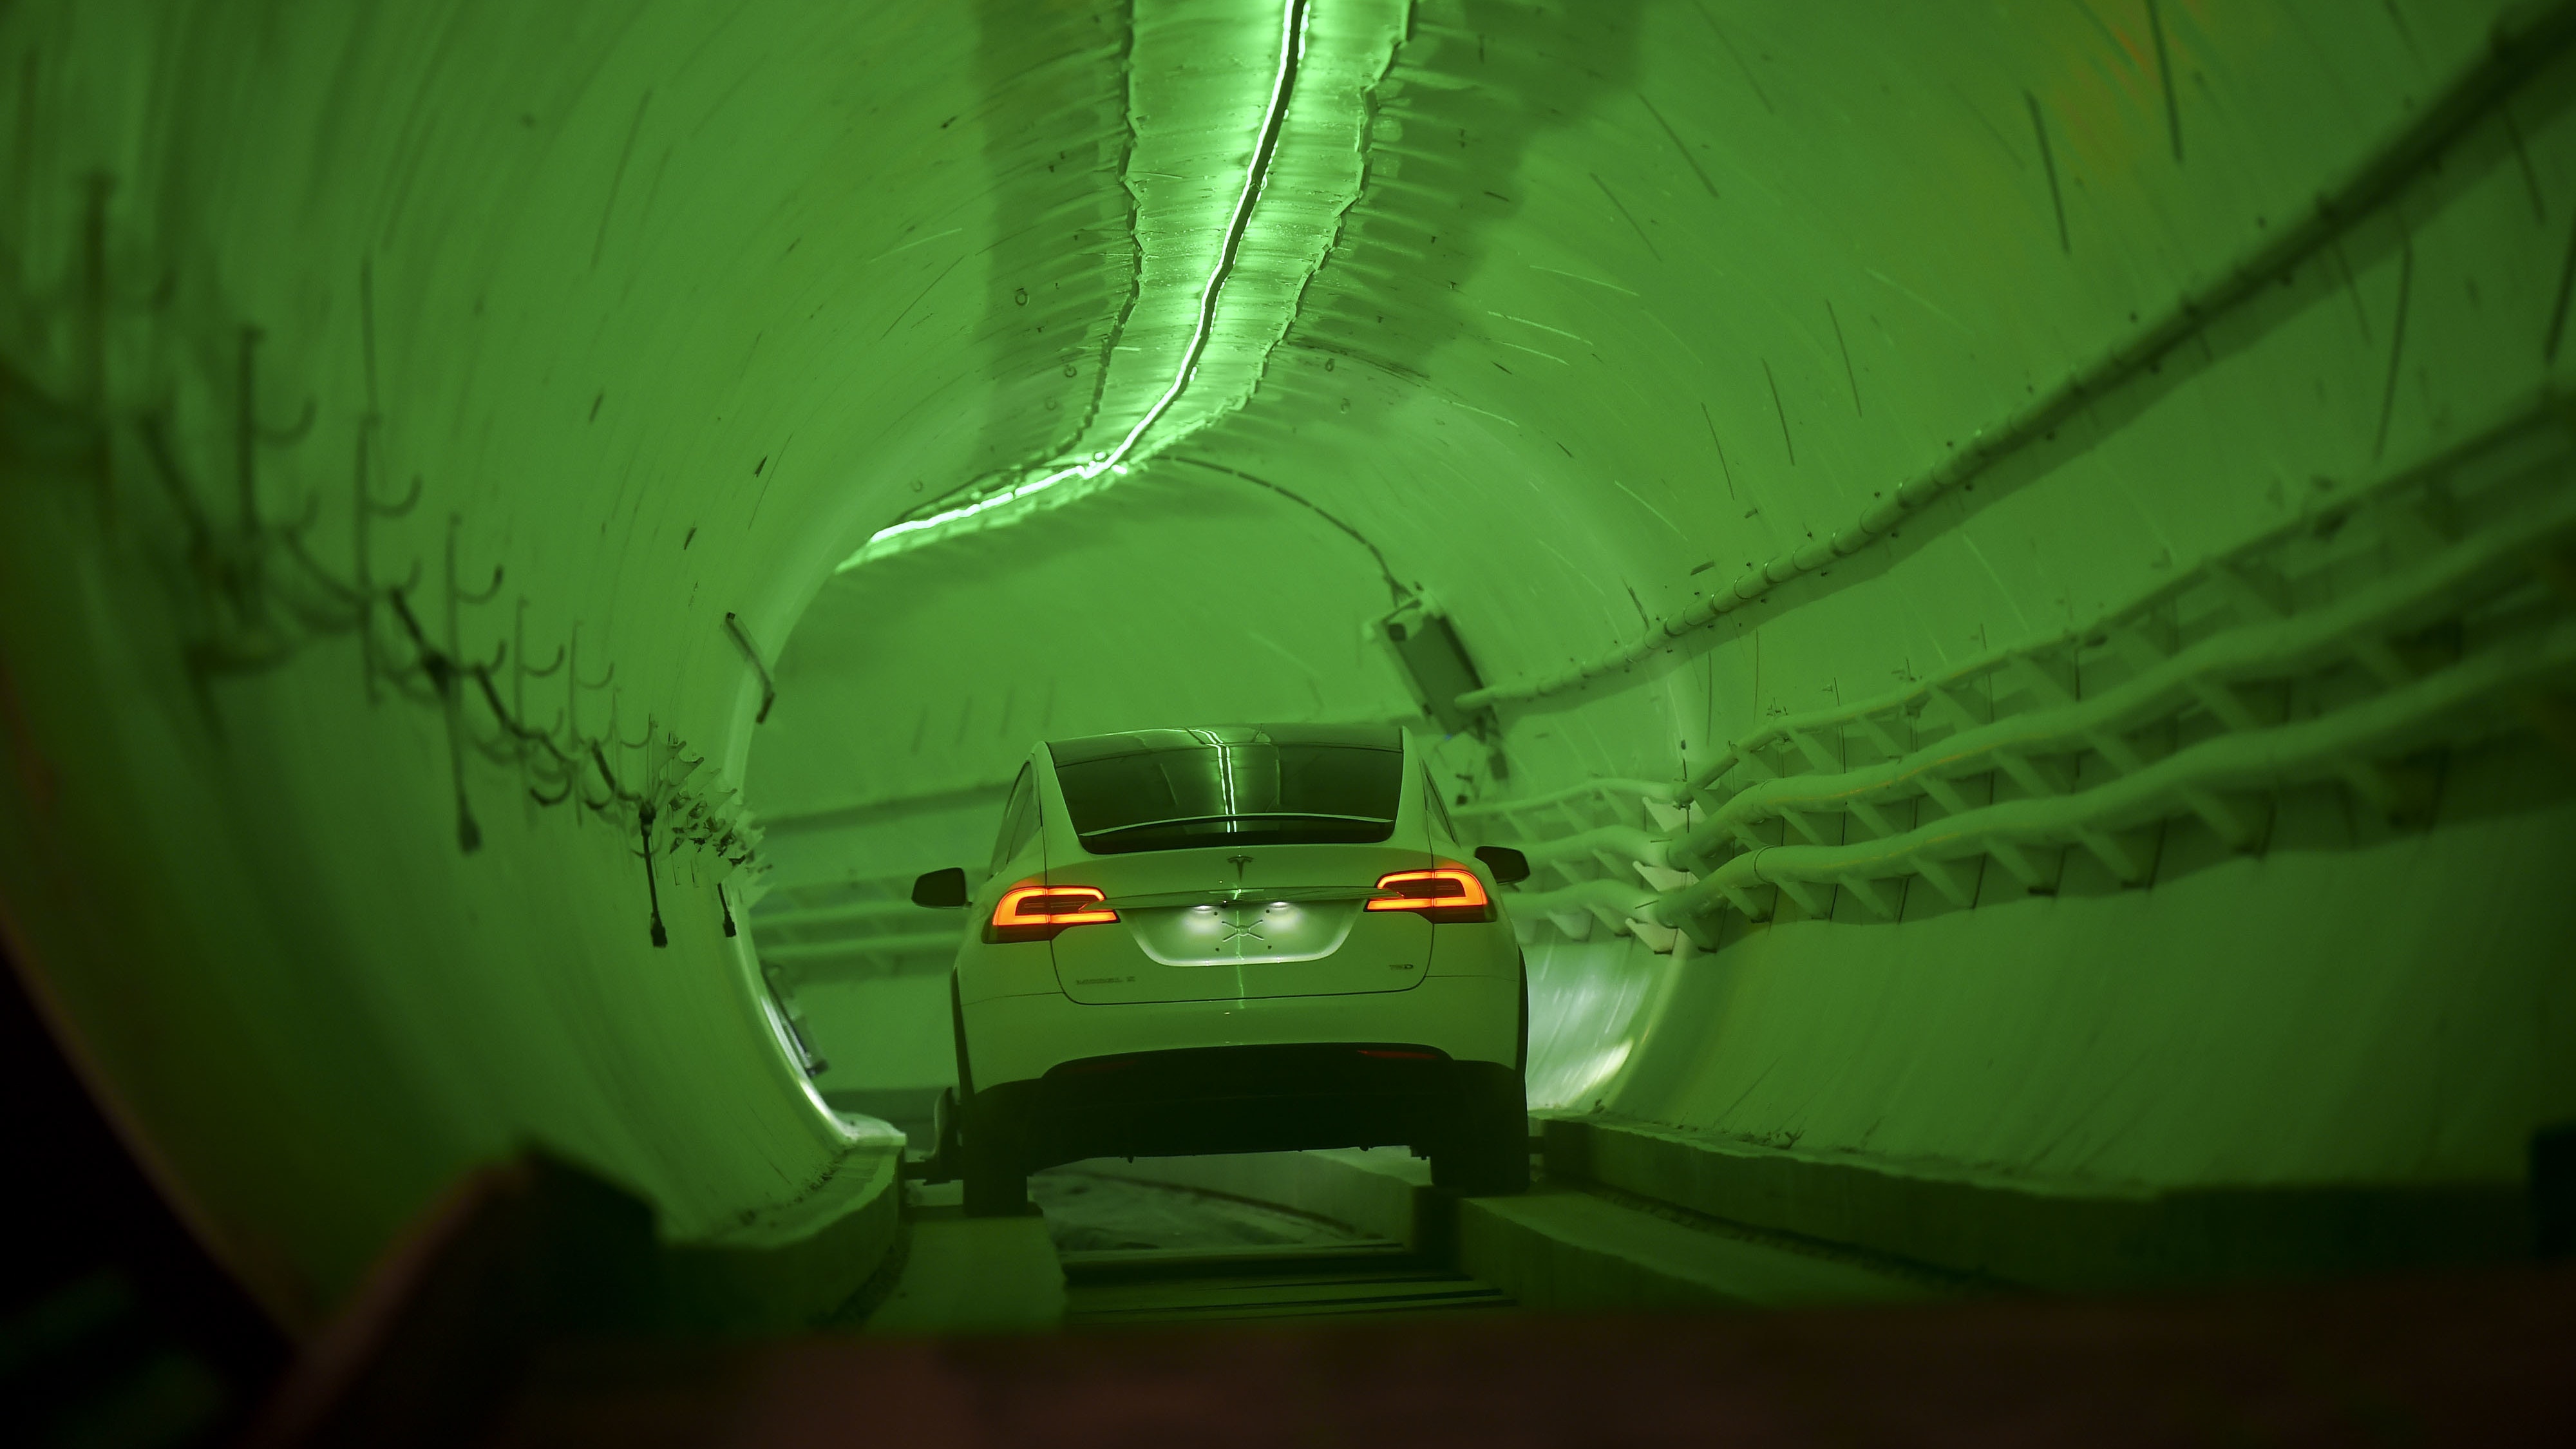 Musk: Tunnels Can Get Adventist College Students Back to Dorms Before Curfew